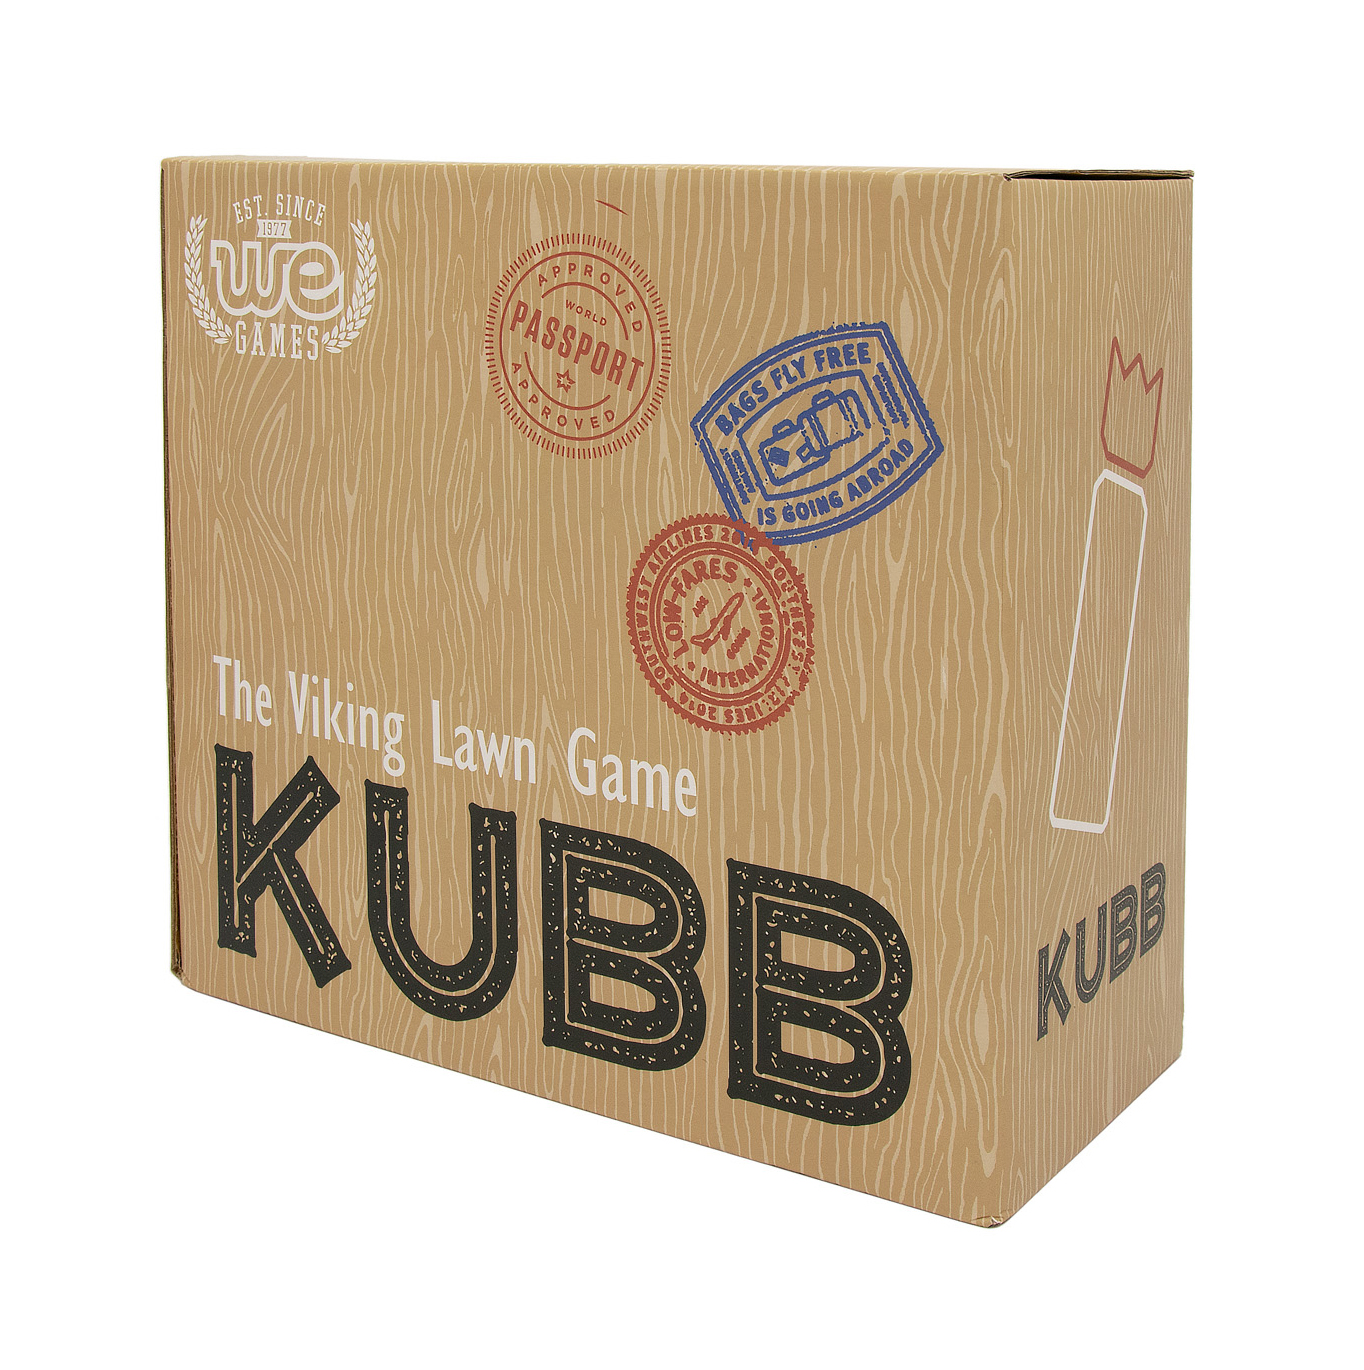  GETMOVIN SPORTS Kubb Premium Rubberwood Set, Viking Chess Fun  Outdoor Yard Game, Giant Board Game for The Beach, Lawn, or Party : Sports  & Outdoors